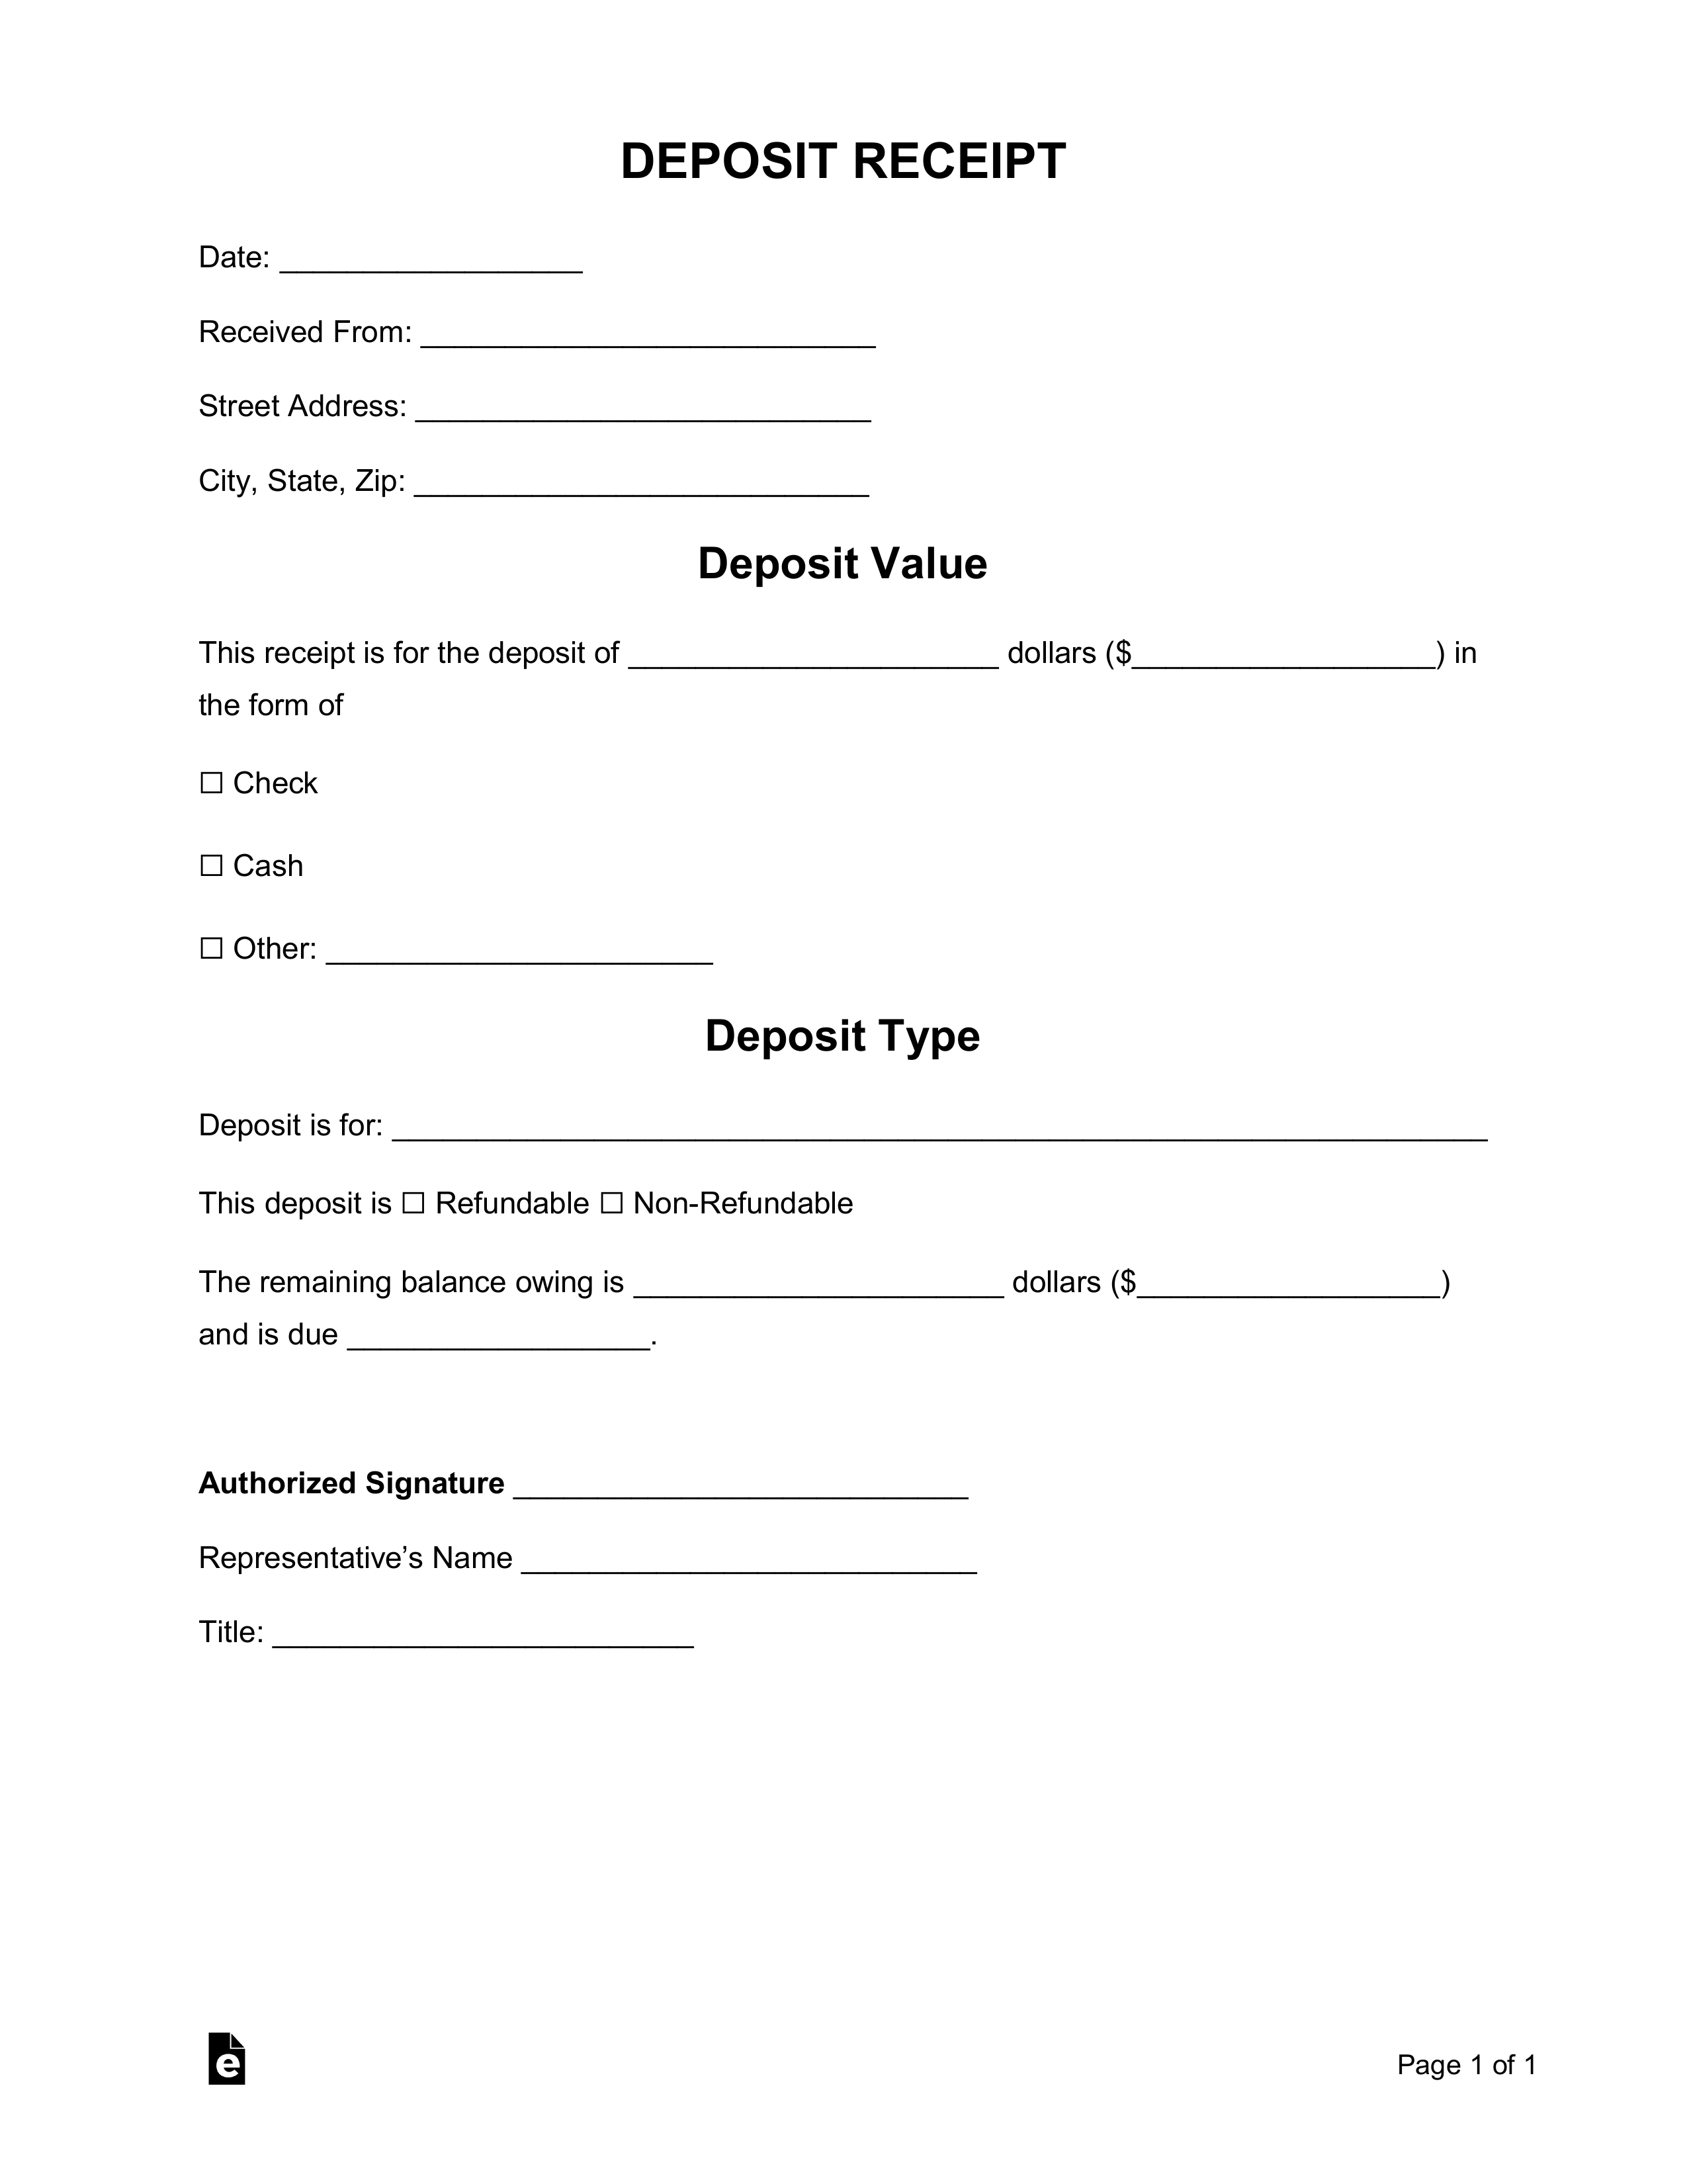 Free Deposit Receipt Templates - Word  PDF – eForms In Holding Deposit Agreement Template Within Holding Deposit Agreement Template